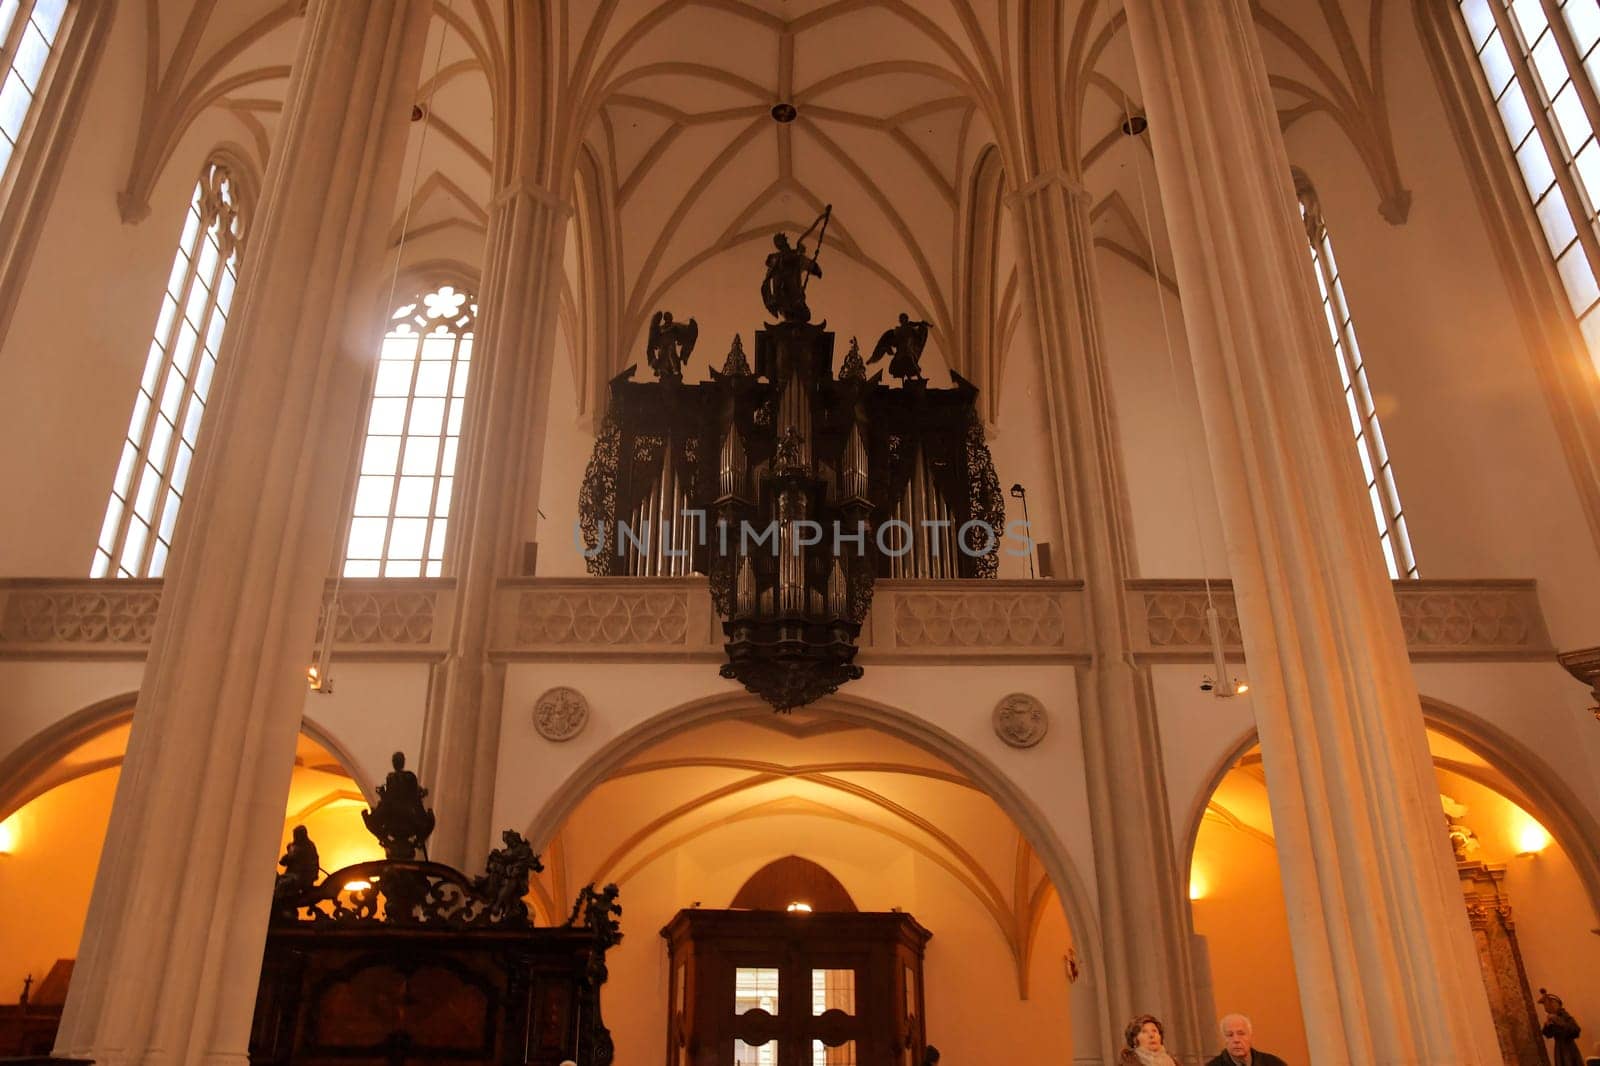 BRNO, THE CZECH REPUBLIC - DECEMBER 28, 2018: The Church of St. Jacob the Elder is a late Gothic three-nave hall church located on the Jakub Square in the Brno. View on church organ.